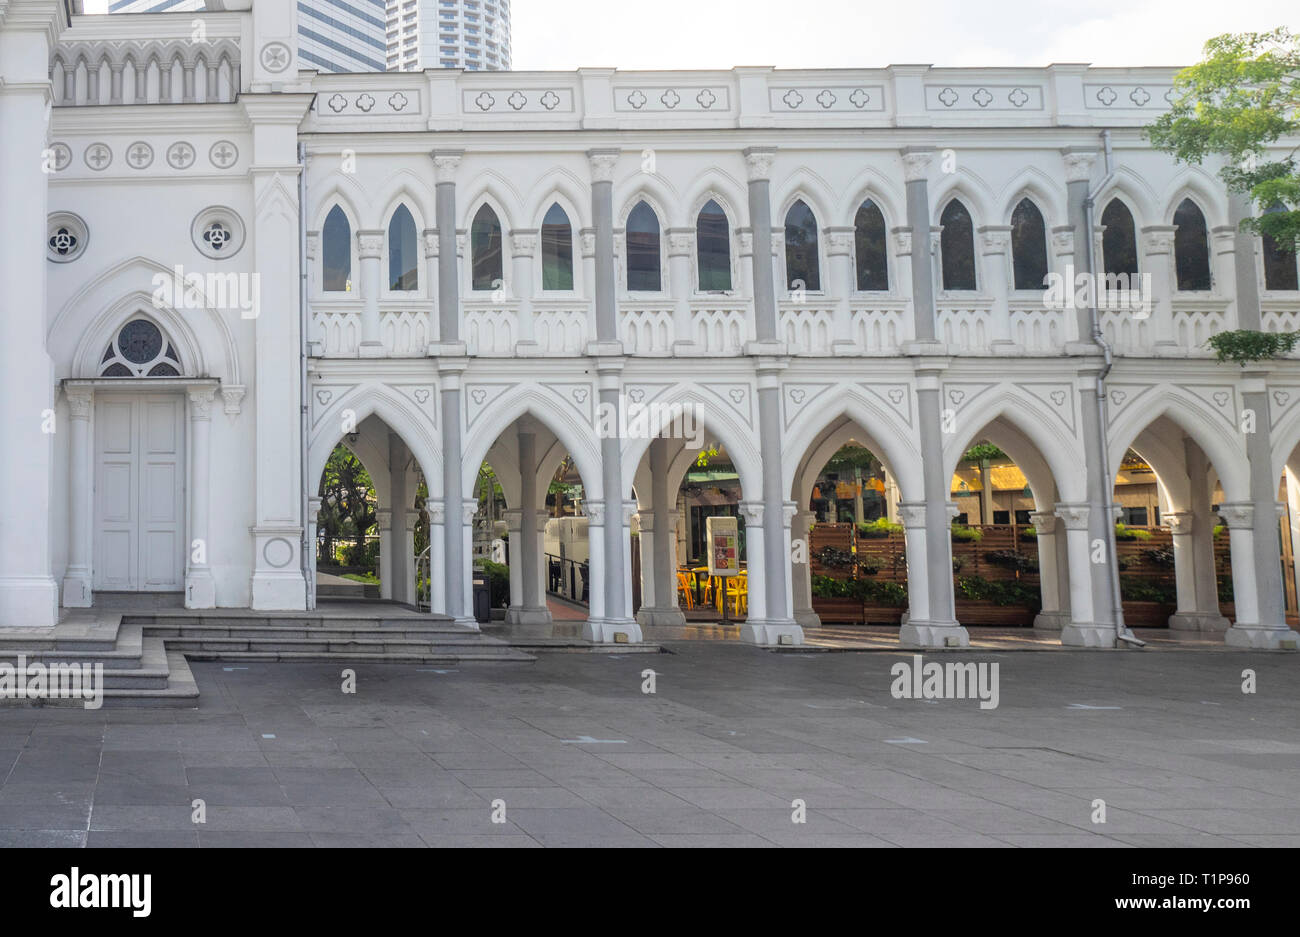 Pointed arch arcade CHIJMES Convent of the Holy Infant Jesus Chapel converted into social hall function event centre Singapore. Stock Photo